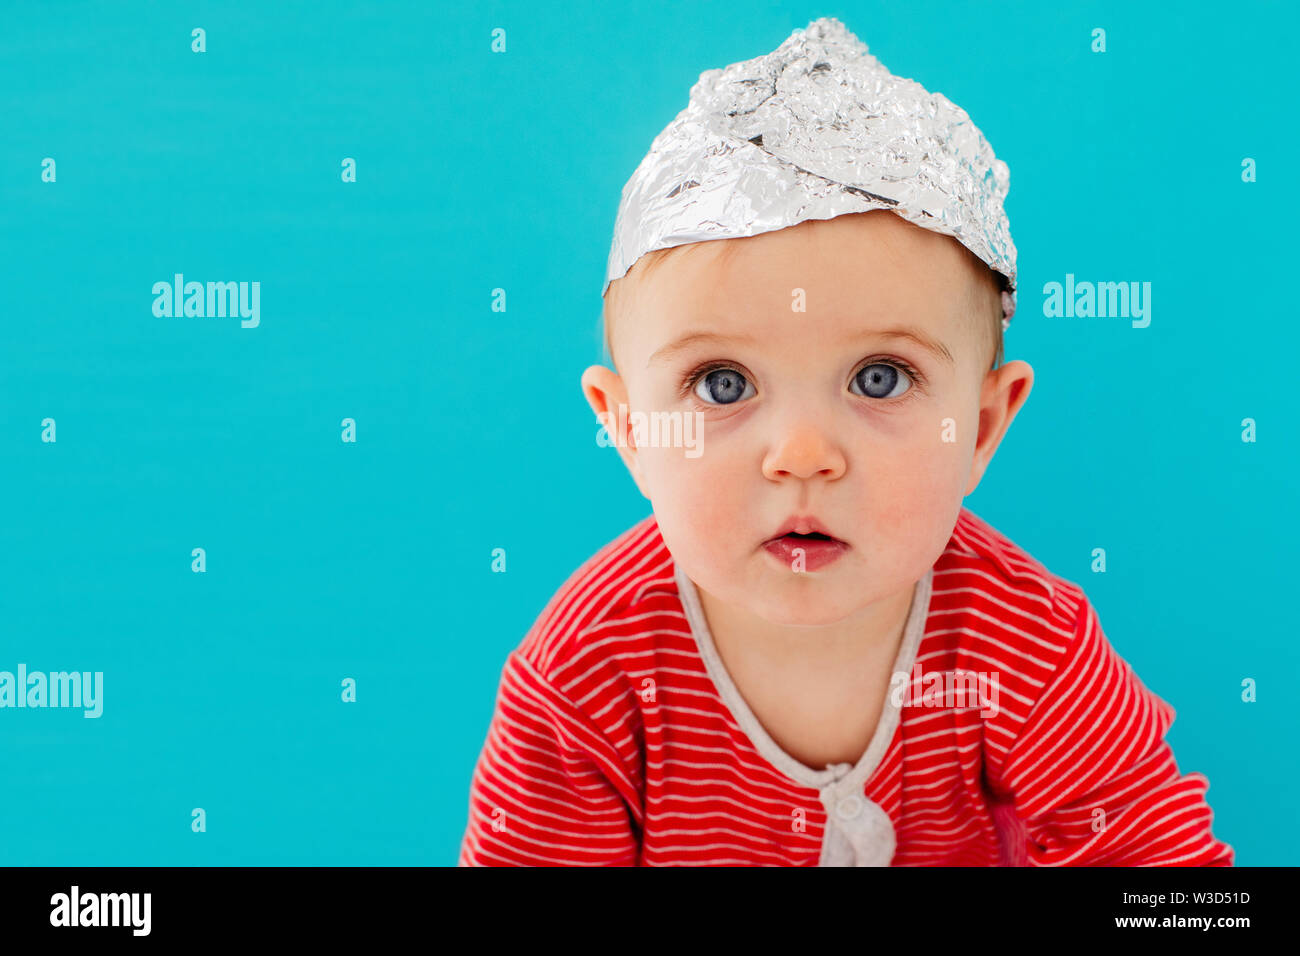 Baby in a foil hat sits on a blue background Stock Photo